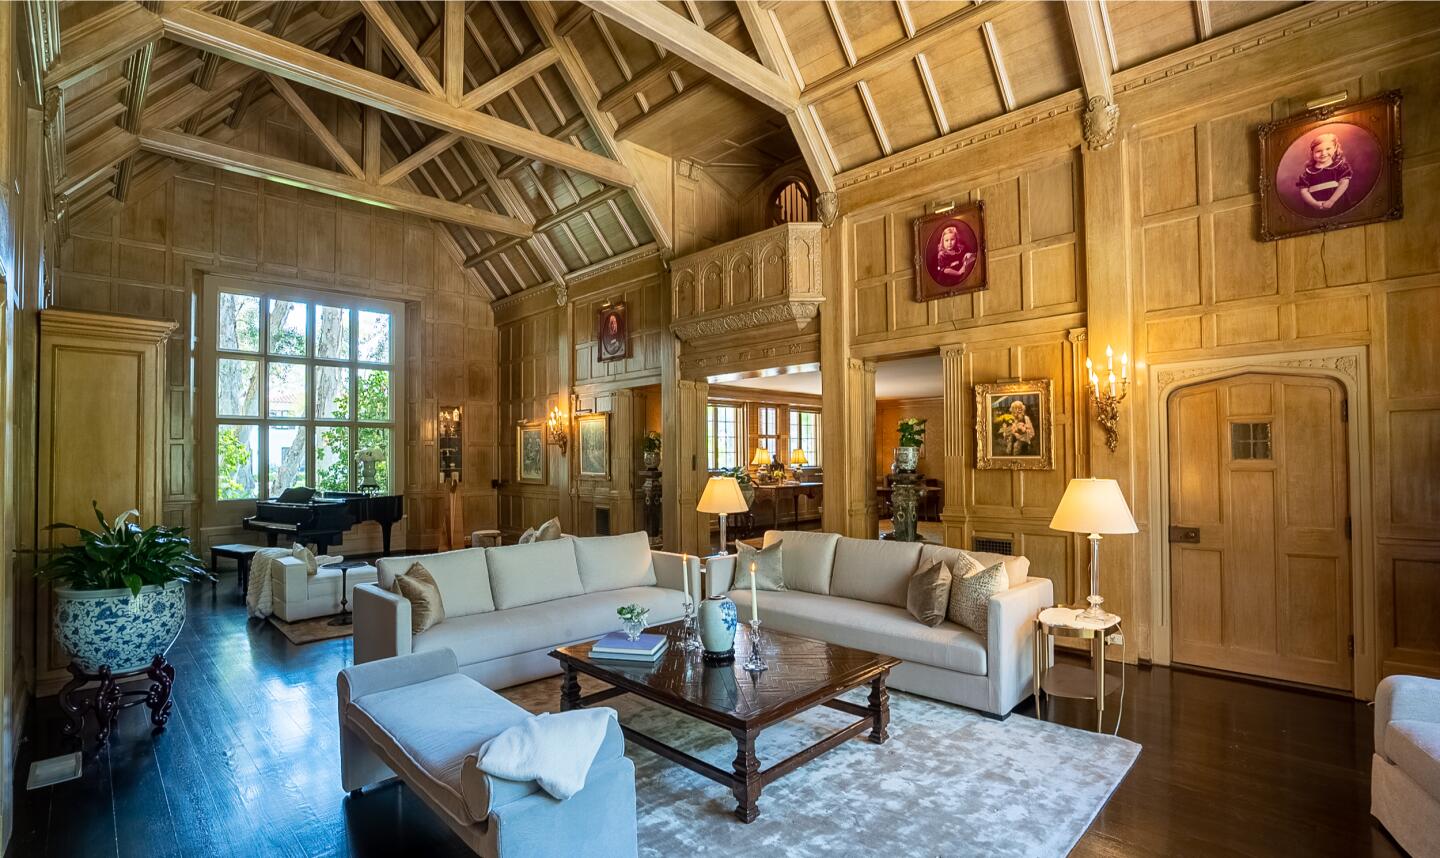 Built in 1924, the English Tudor Revival features brick, stone, teak and dramatic living spaces under 24-foot ceilings.